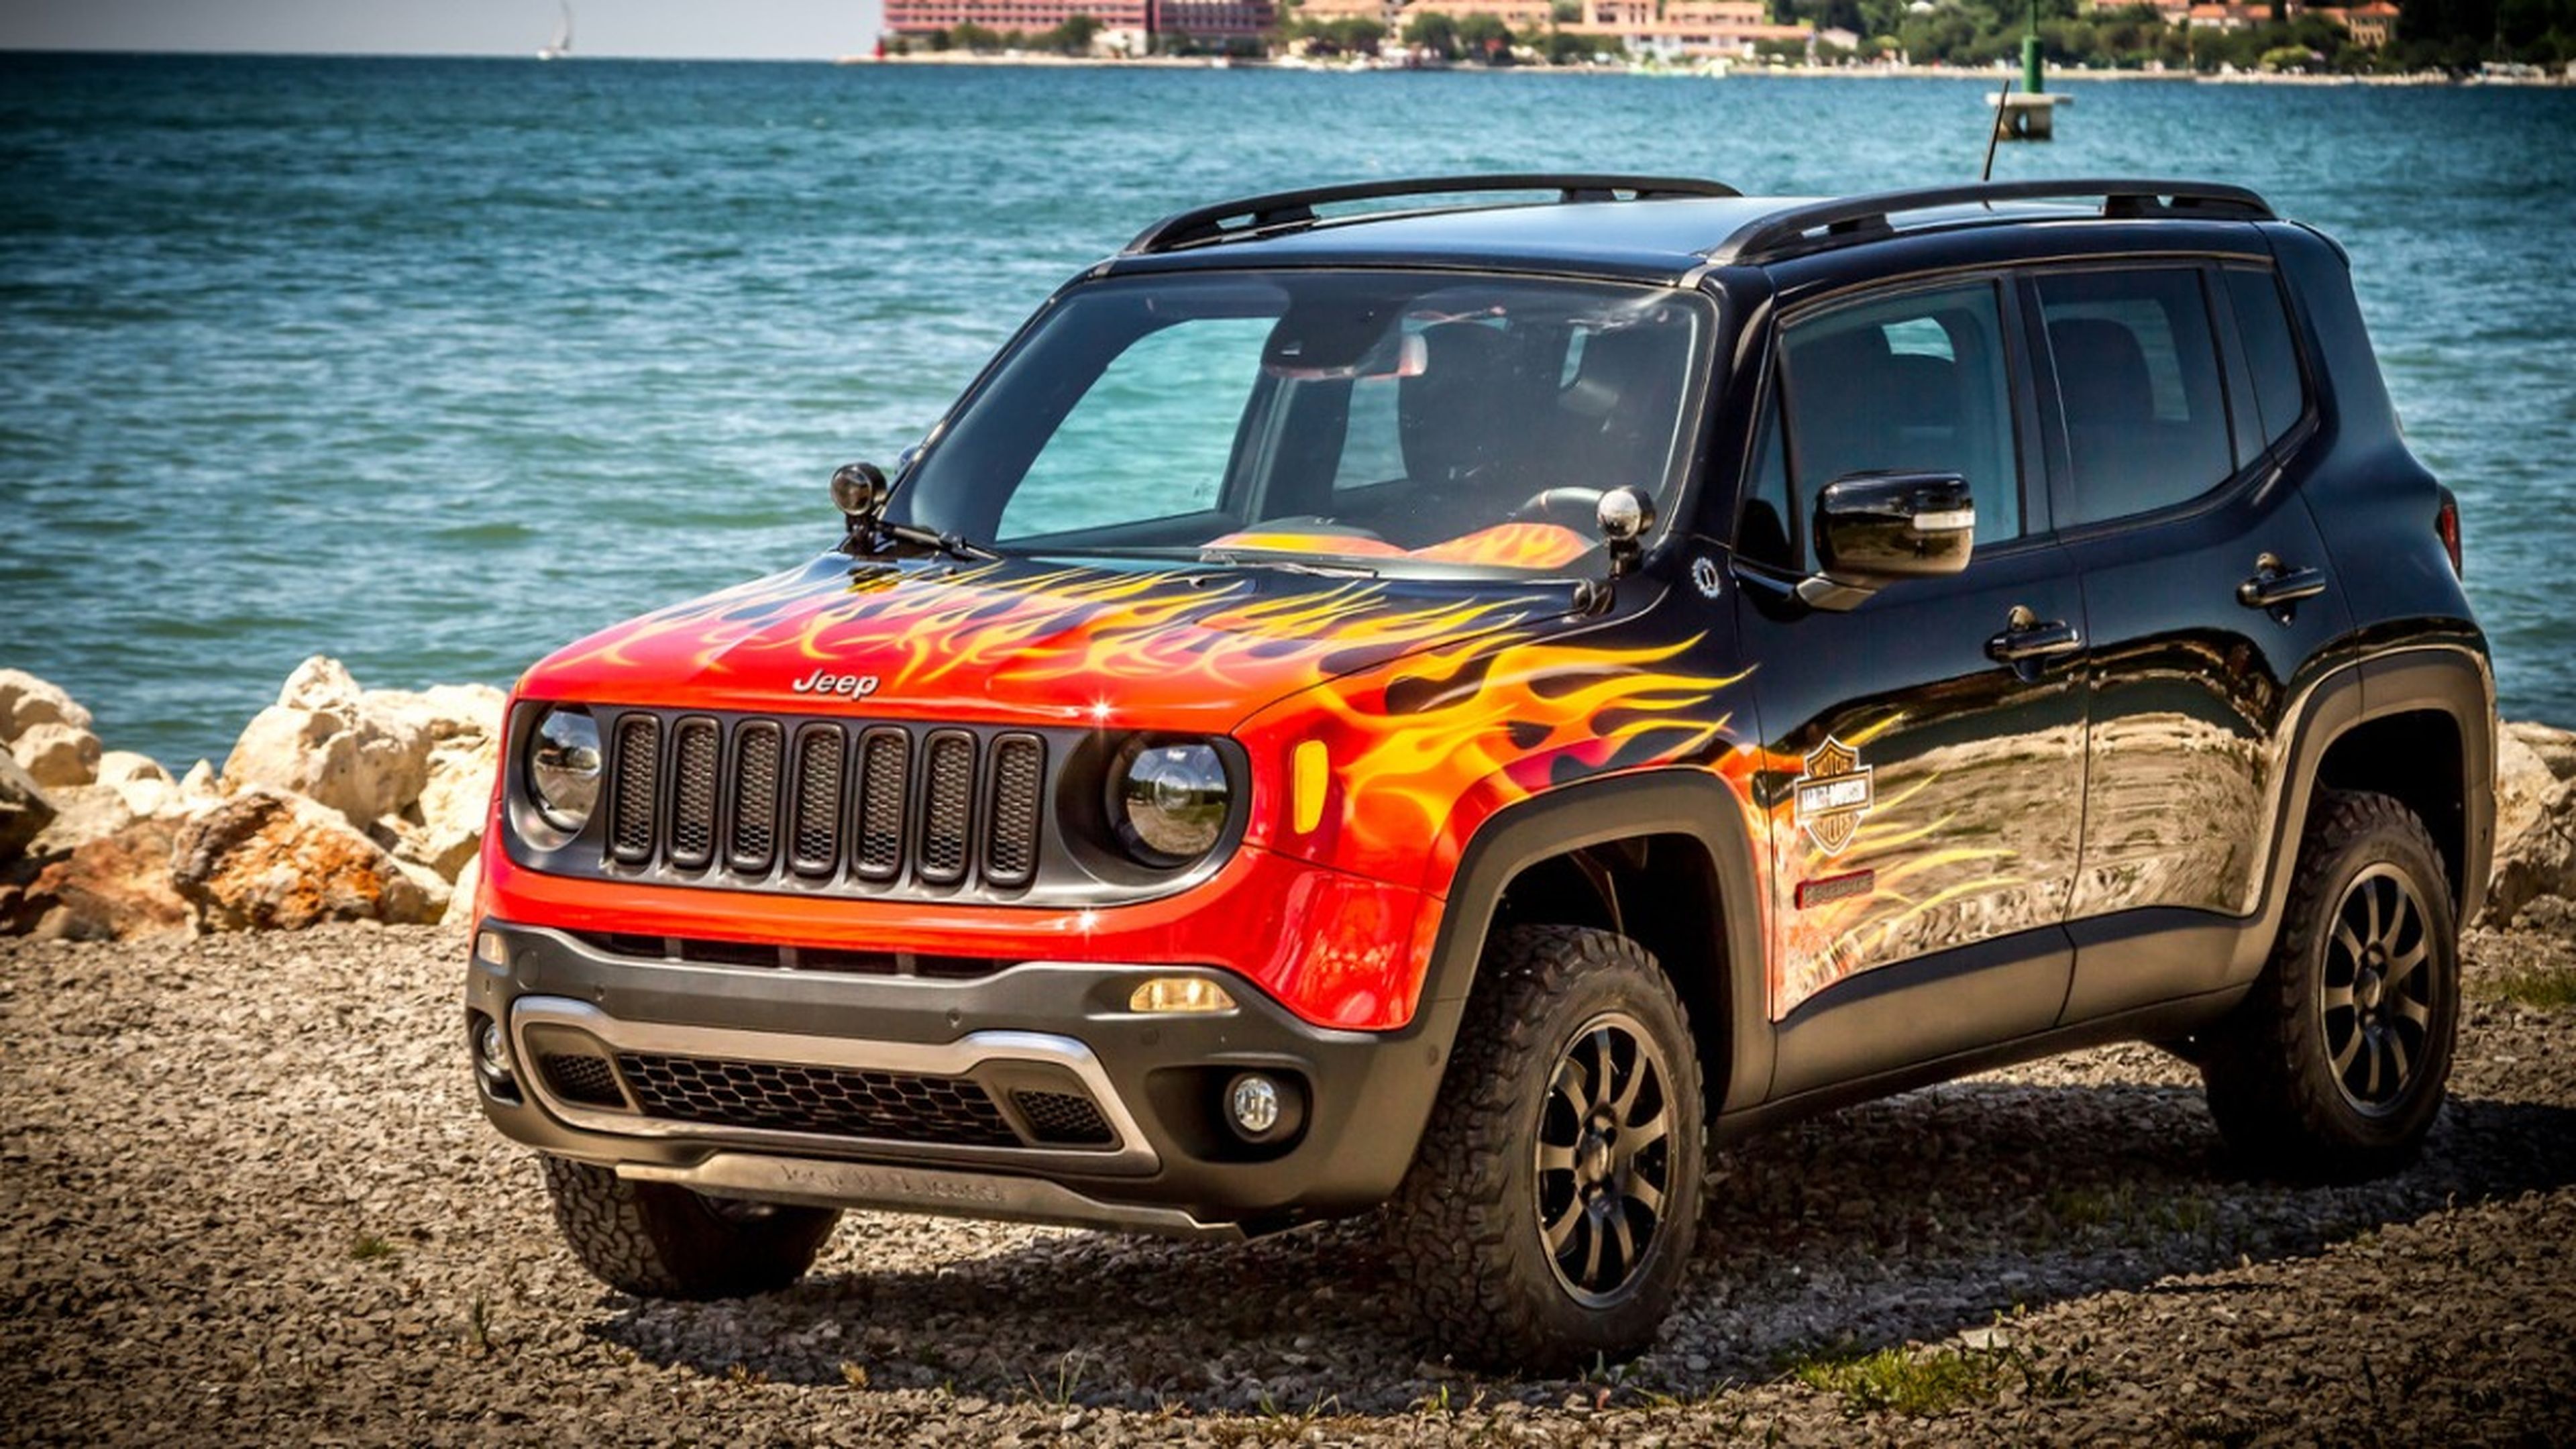 Jeep Renegade Hell's Revenge frontal